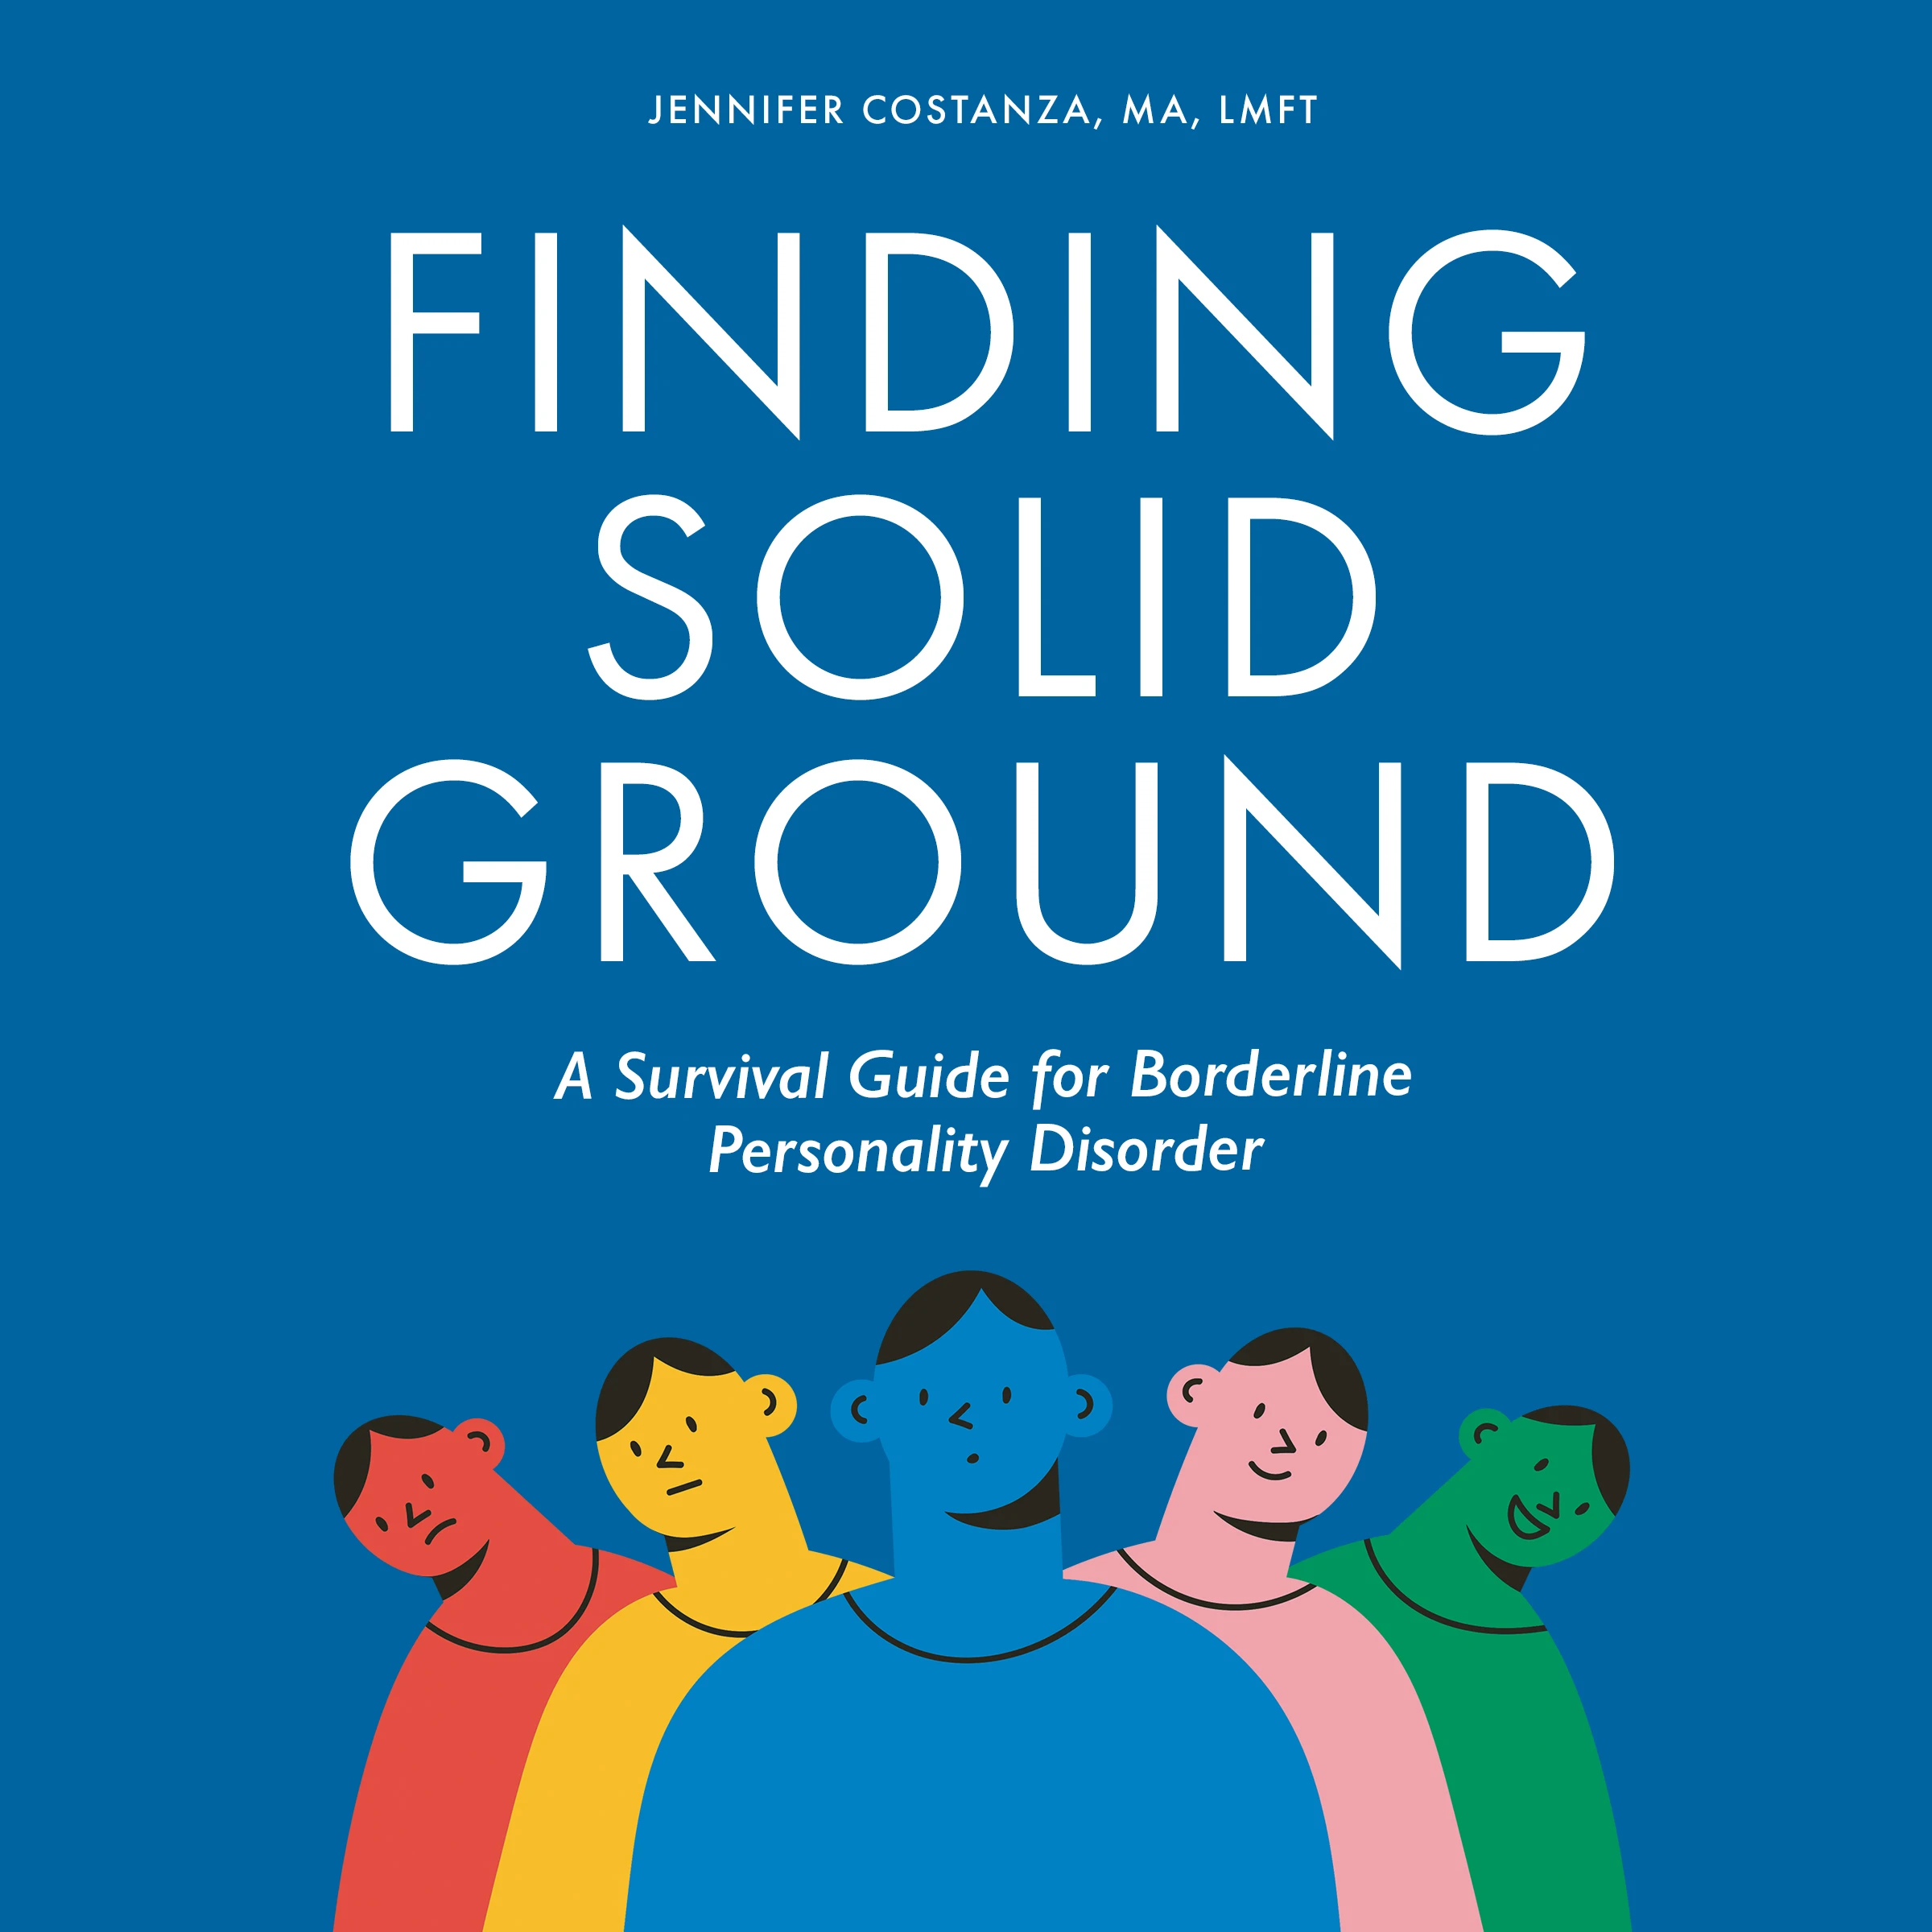 Finding Solid Ground: A Survival Guide for Borderline Personality Disorder